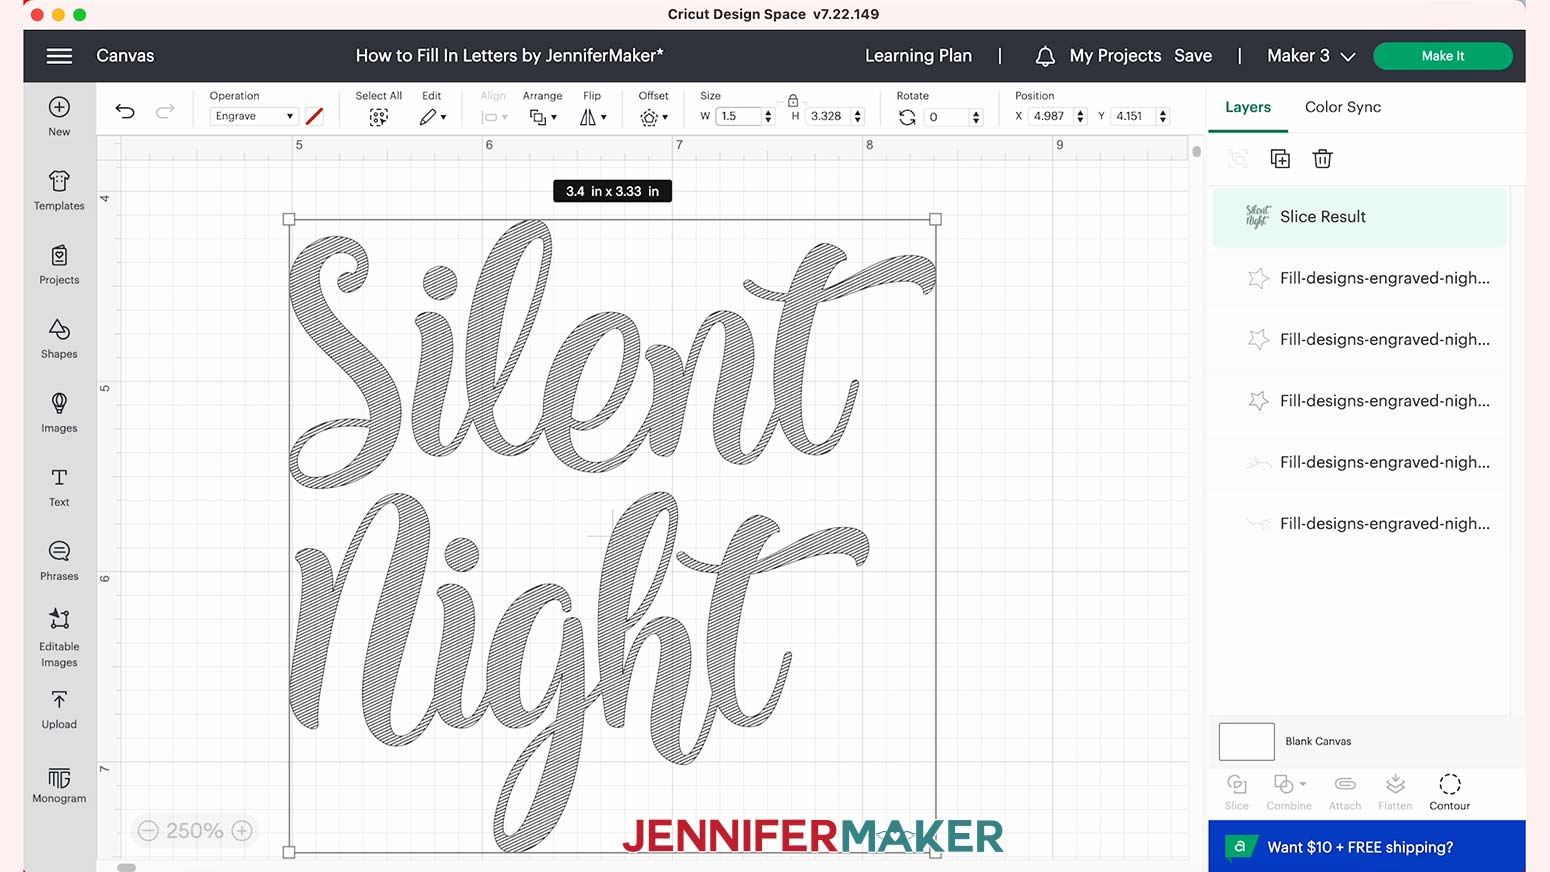 fill designs jennifermaker silent night design to engrave with infill with Cricut Design Space and Maker3